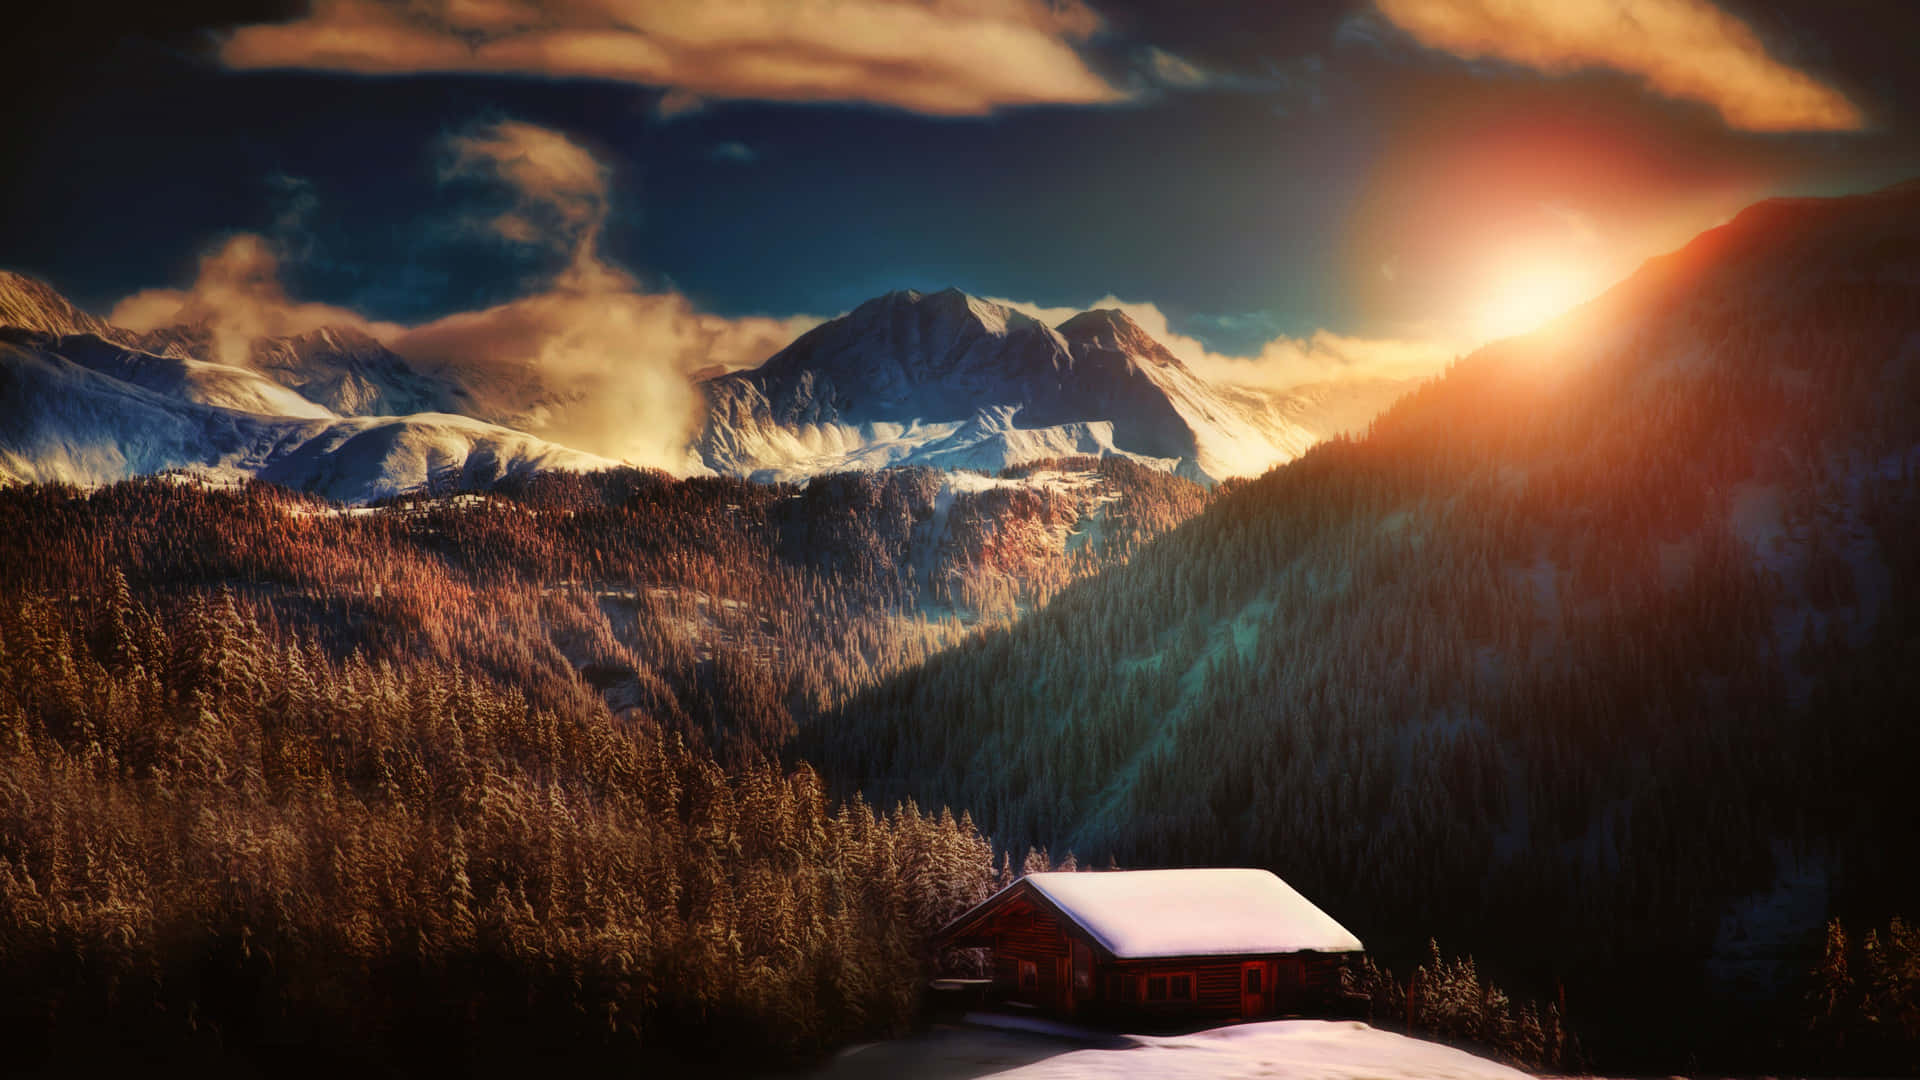 "Soak up the beauty of Mother Nature with this gorgeous 4K mountain view"